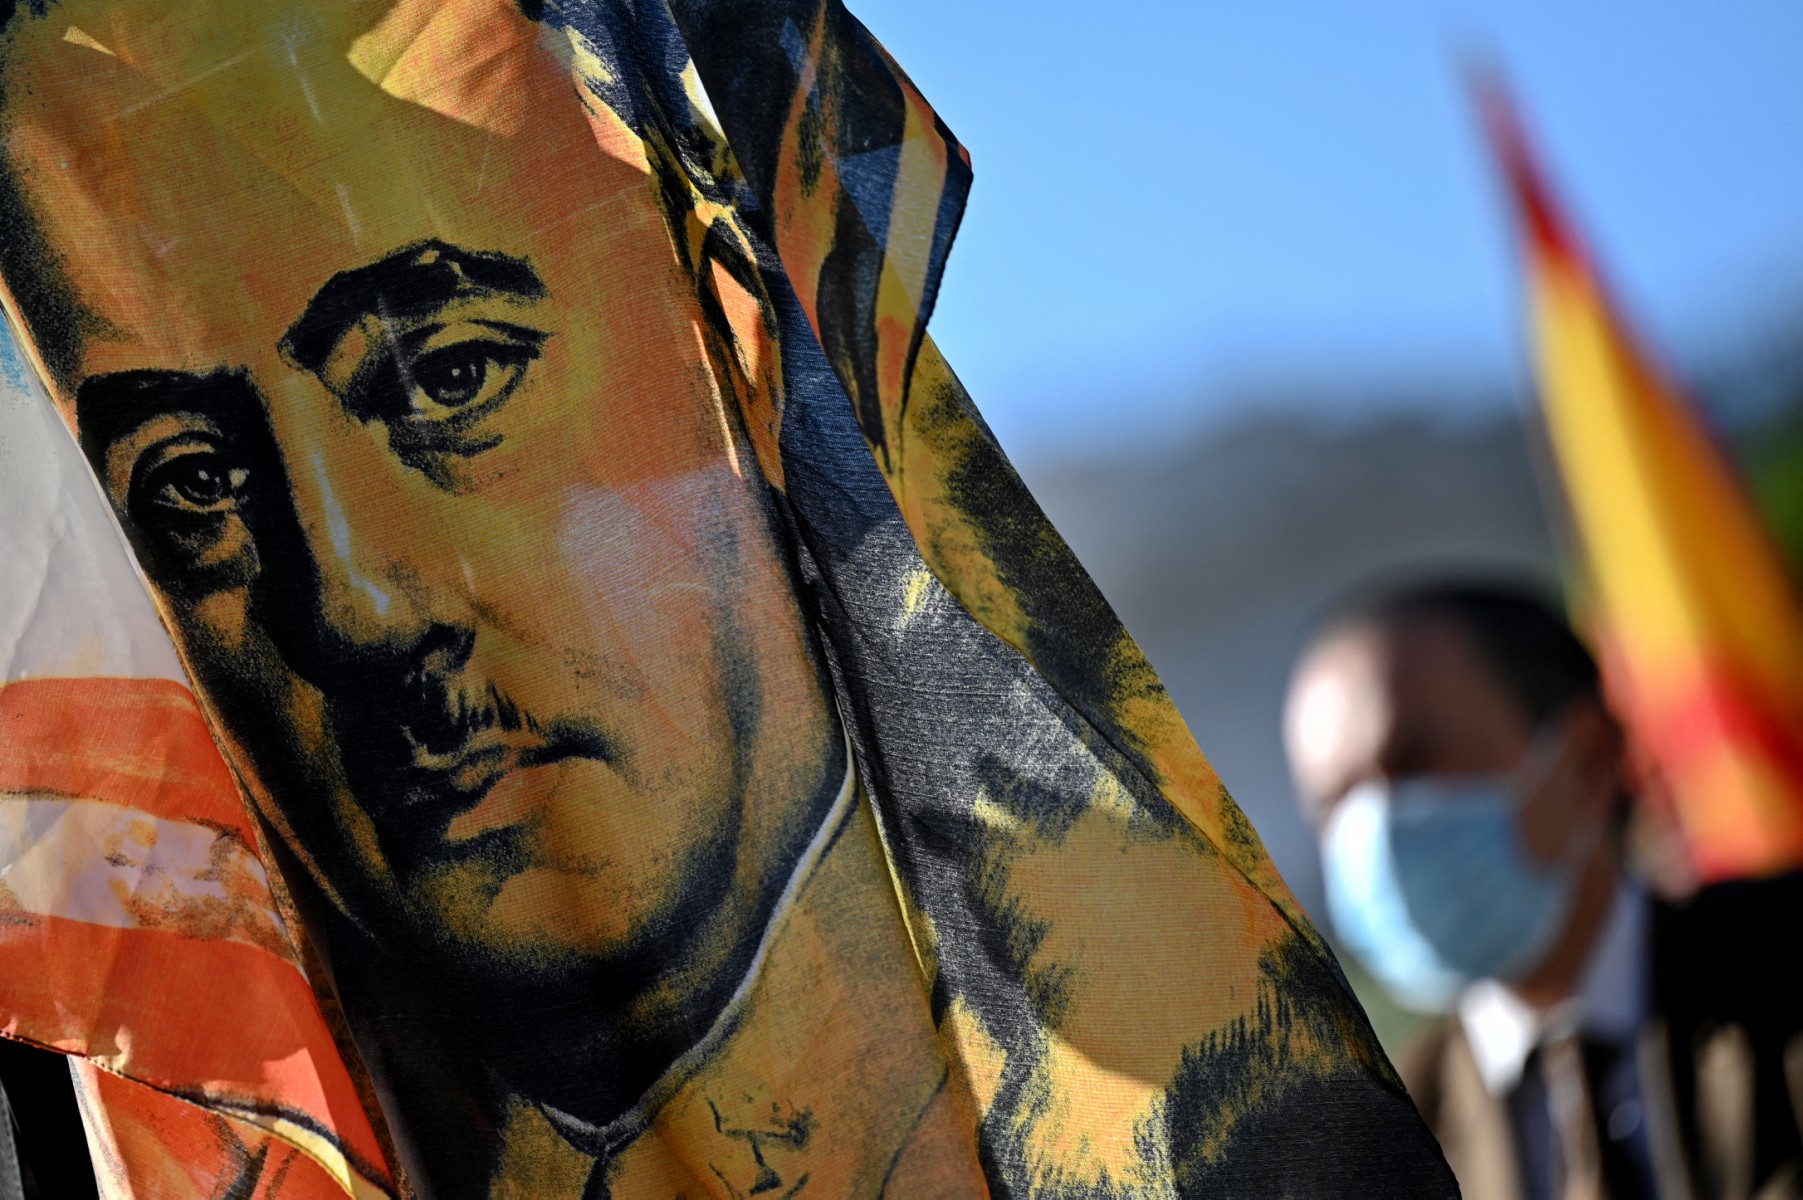 The row brewing in Spain over whether Franco's regime was a dictatorship thumbnail